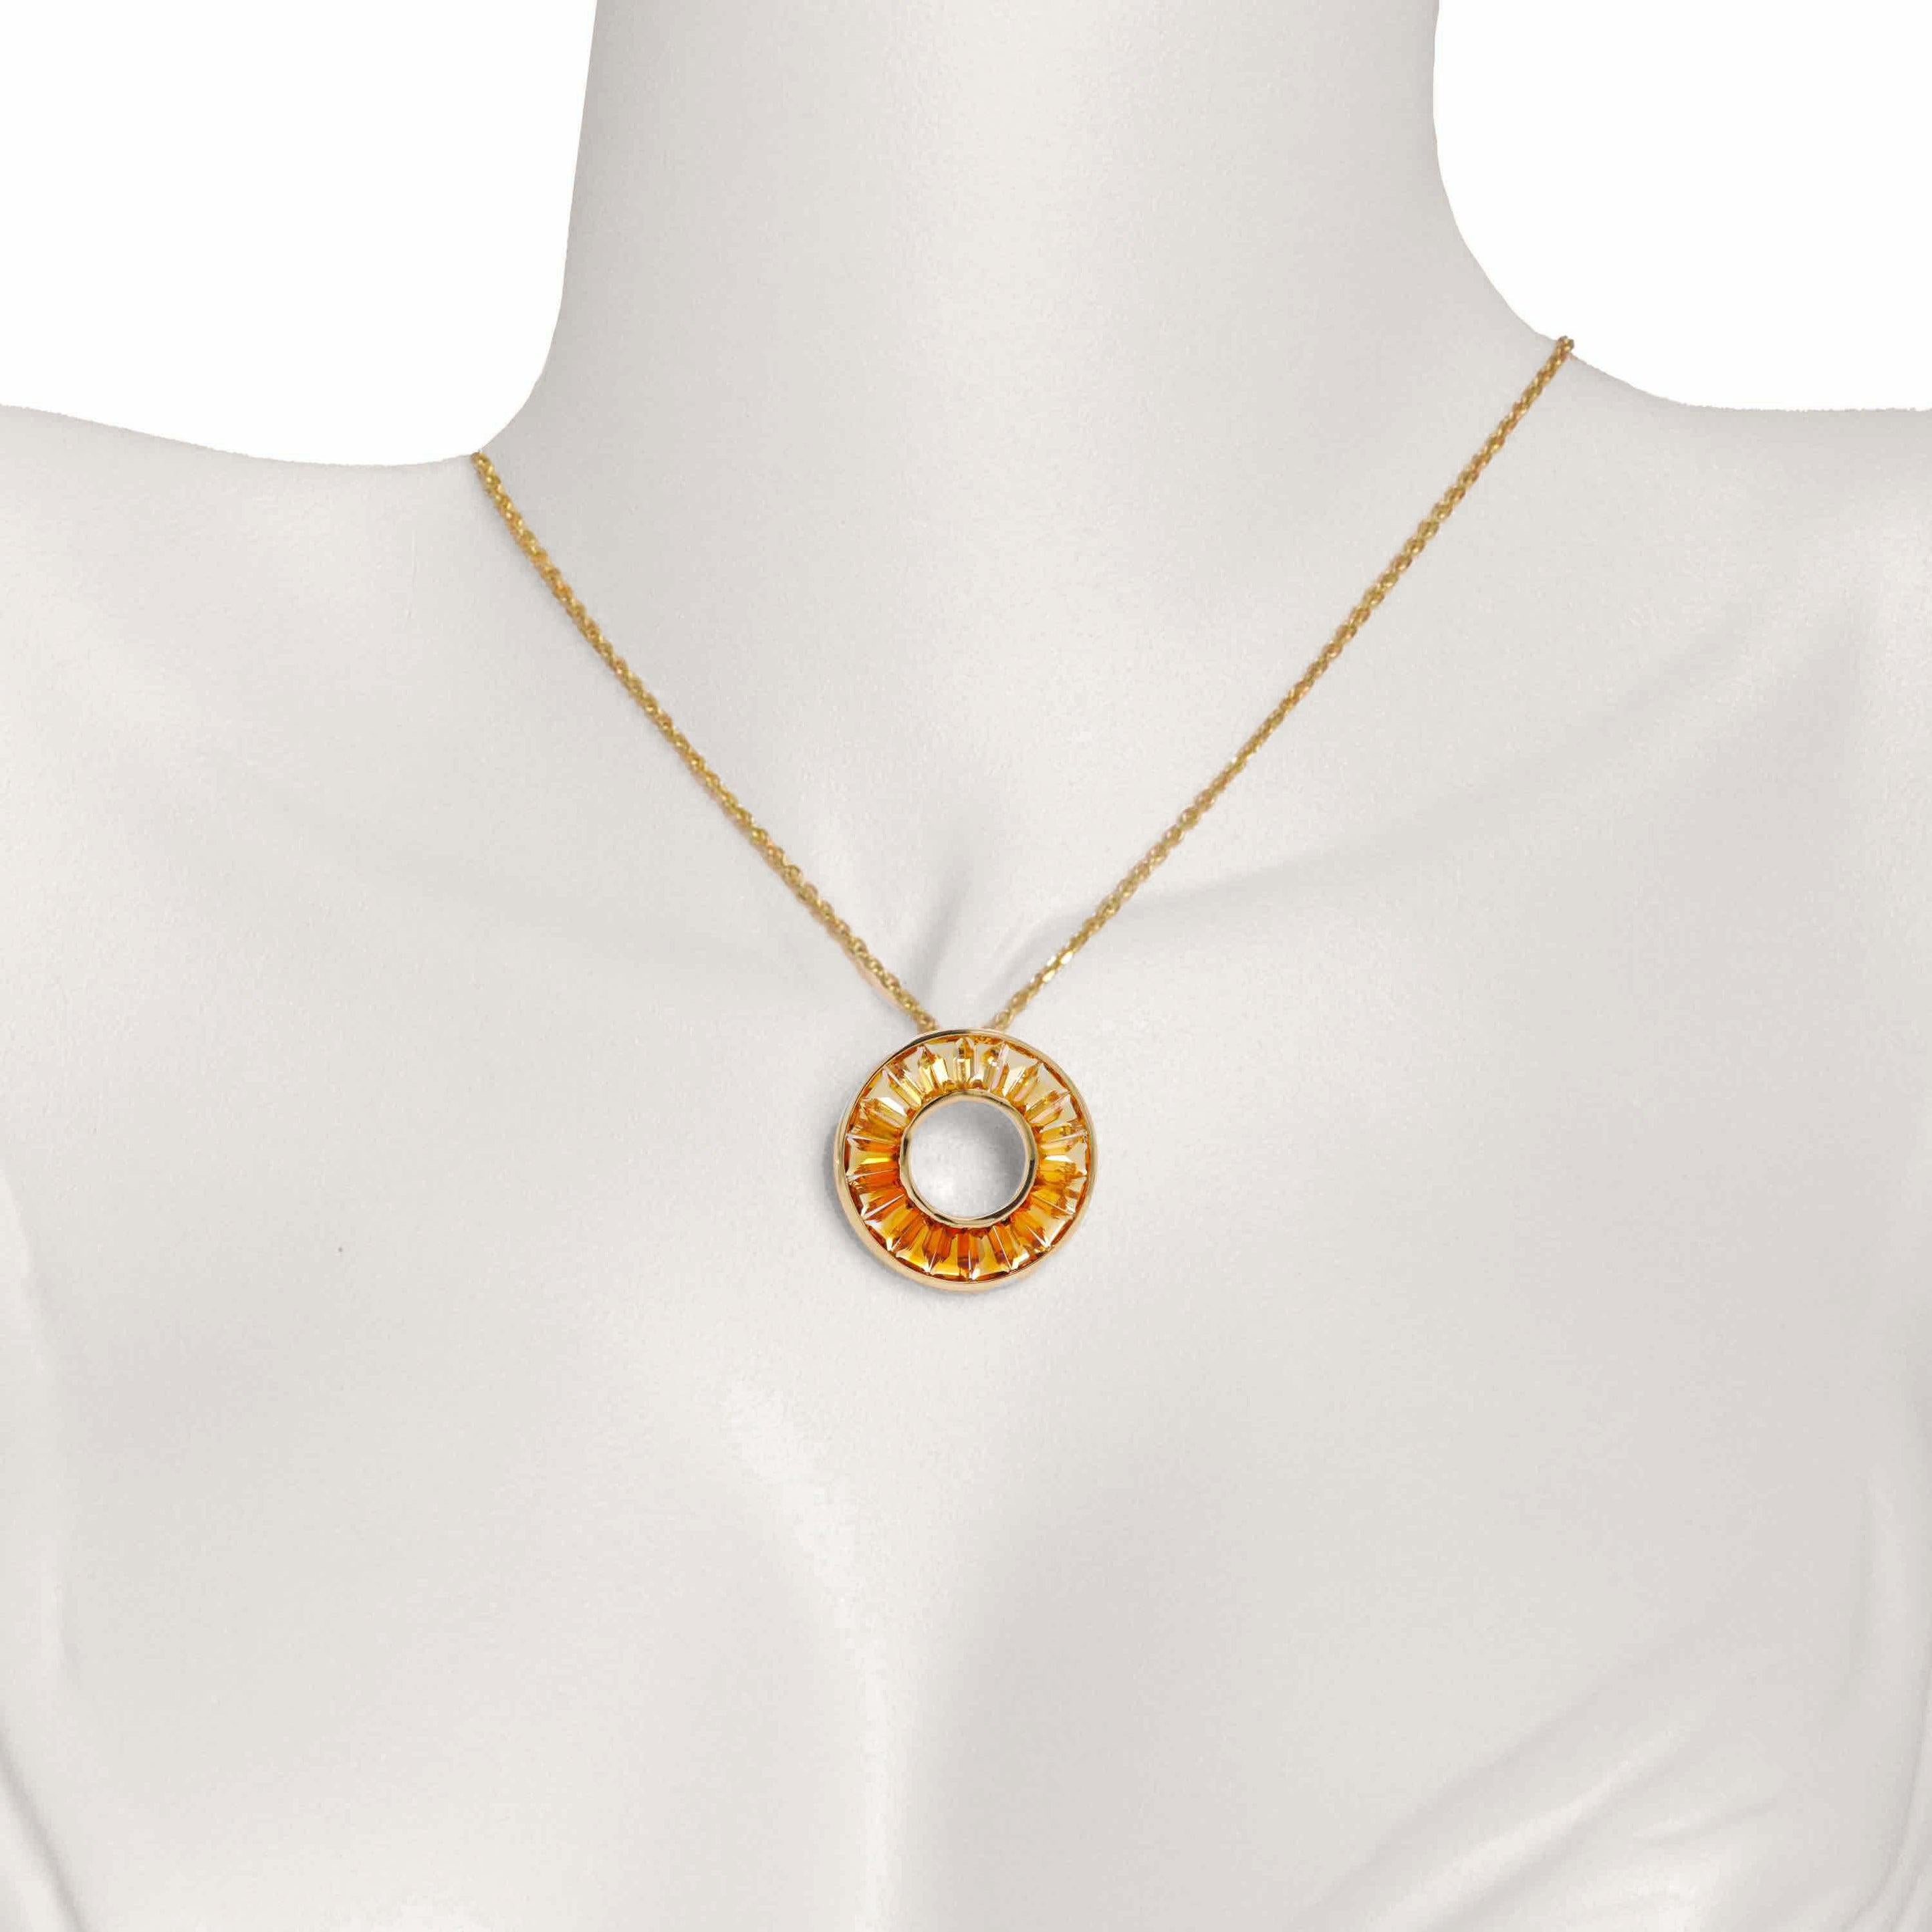 This elegant 18k yellow gold citrine circle pendant necklace is a stunning piece that radiates warmth and sophistication. This necklace features a captivating citrine gemstone in a circular setting, creating a harmonious blend of elegance and